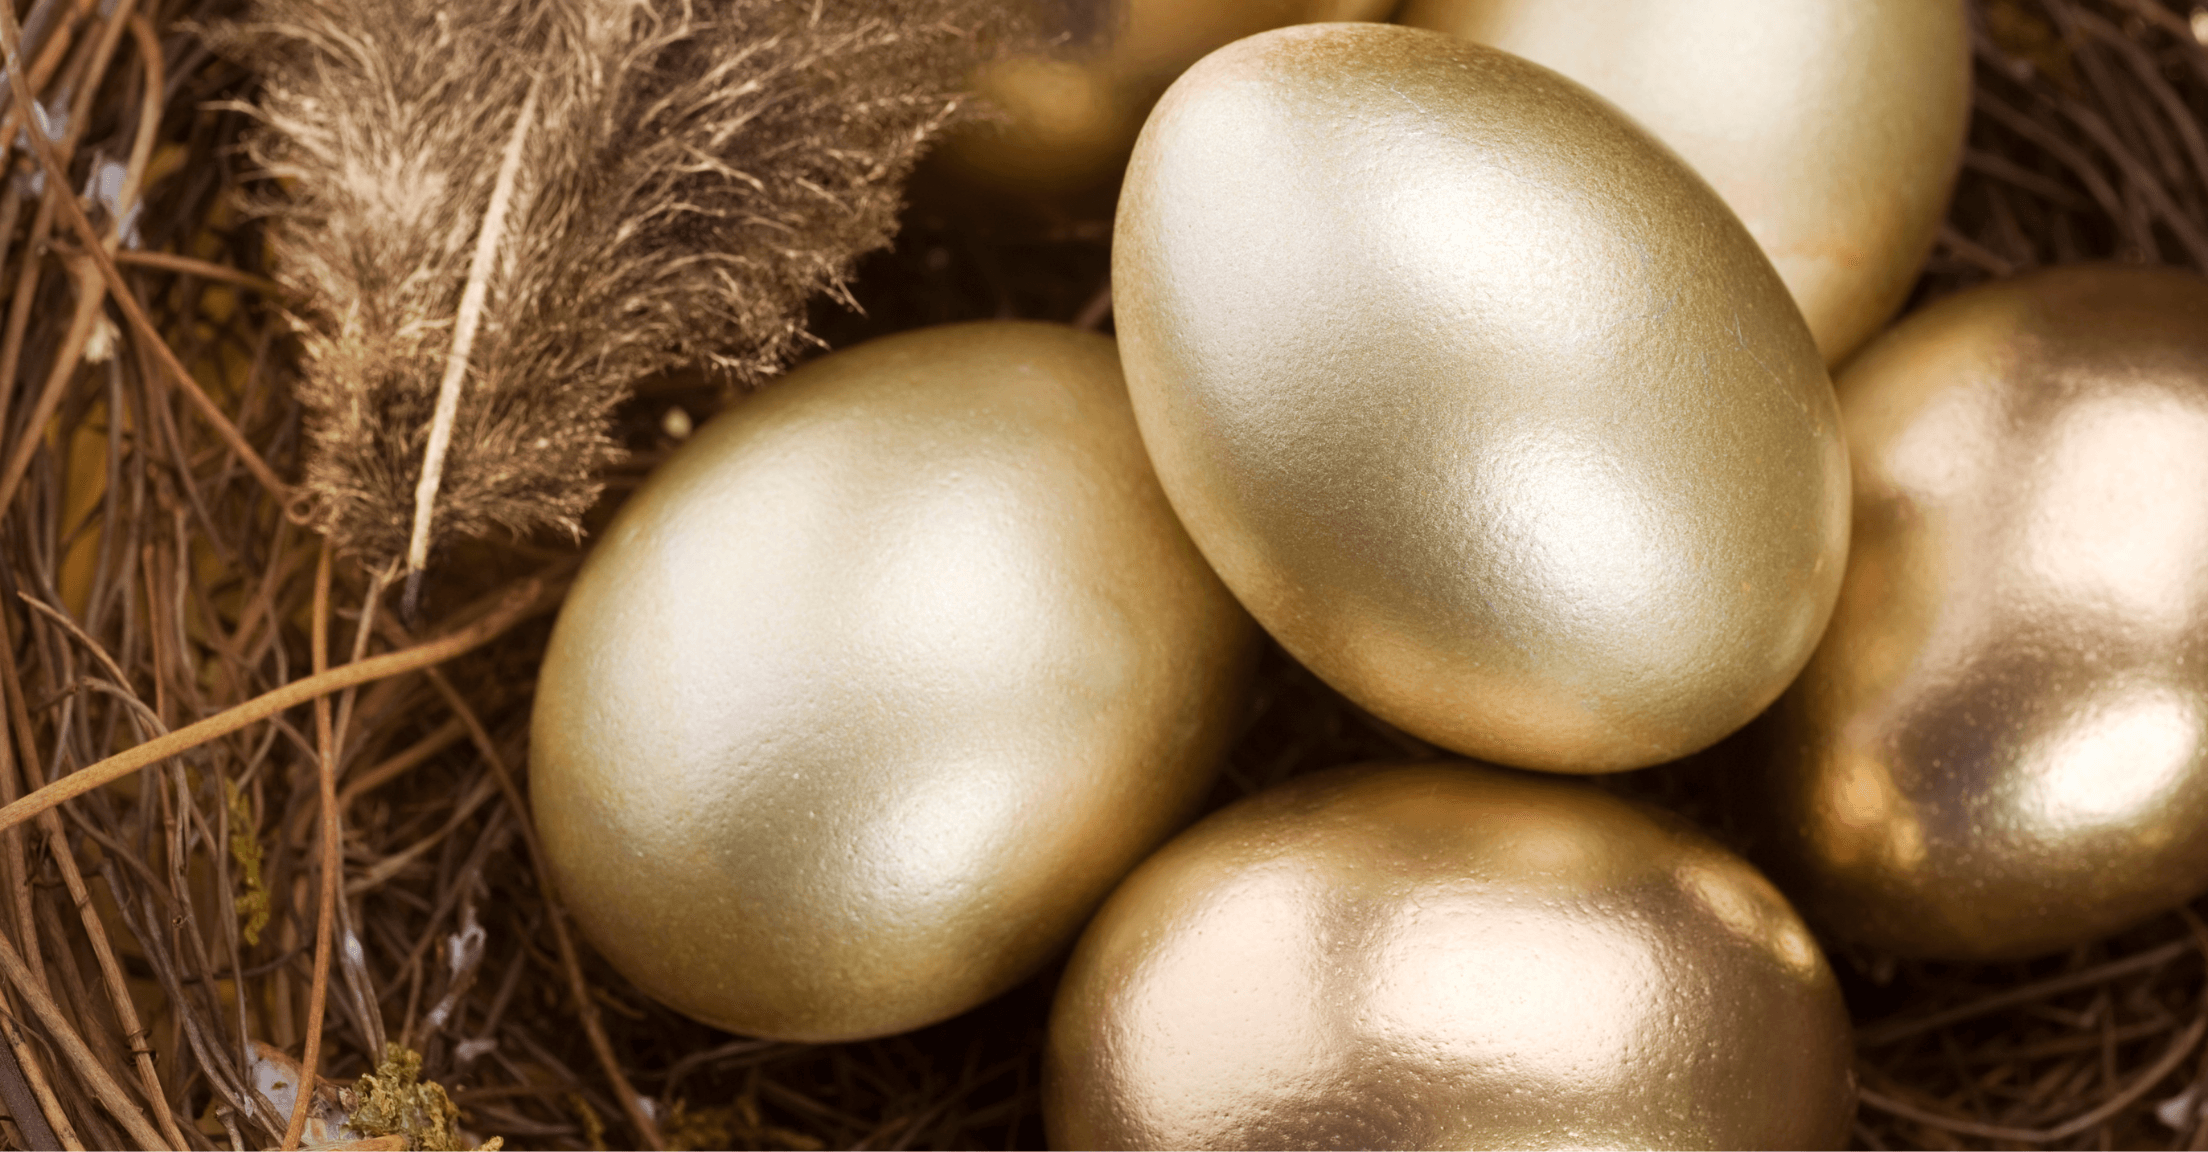 Golden eggs in a nest, to indicate "nest egg" / retirement planning